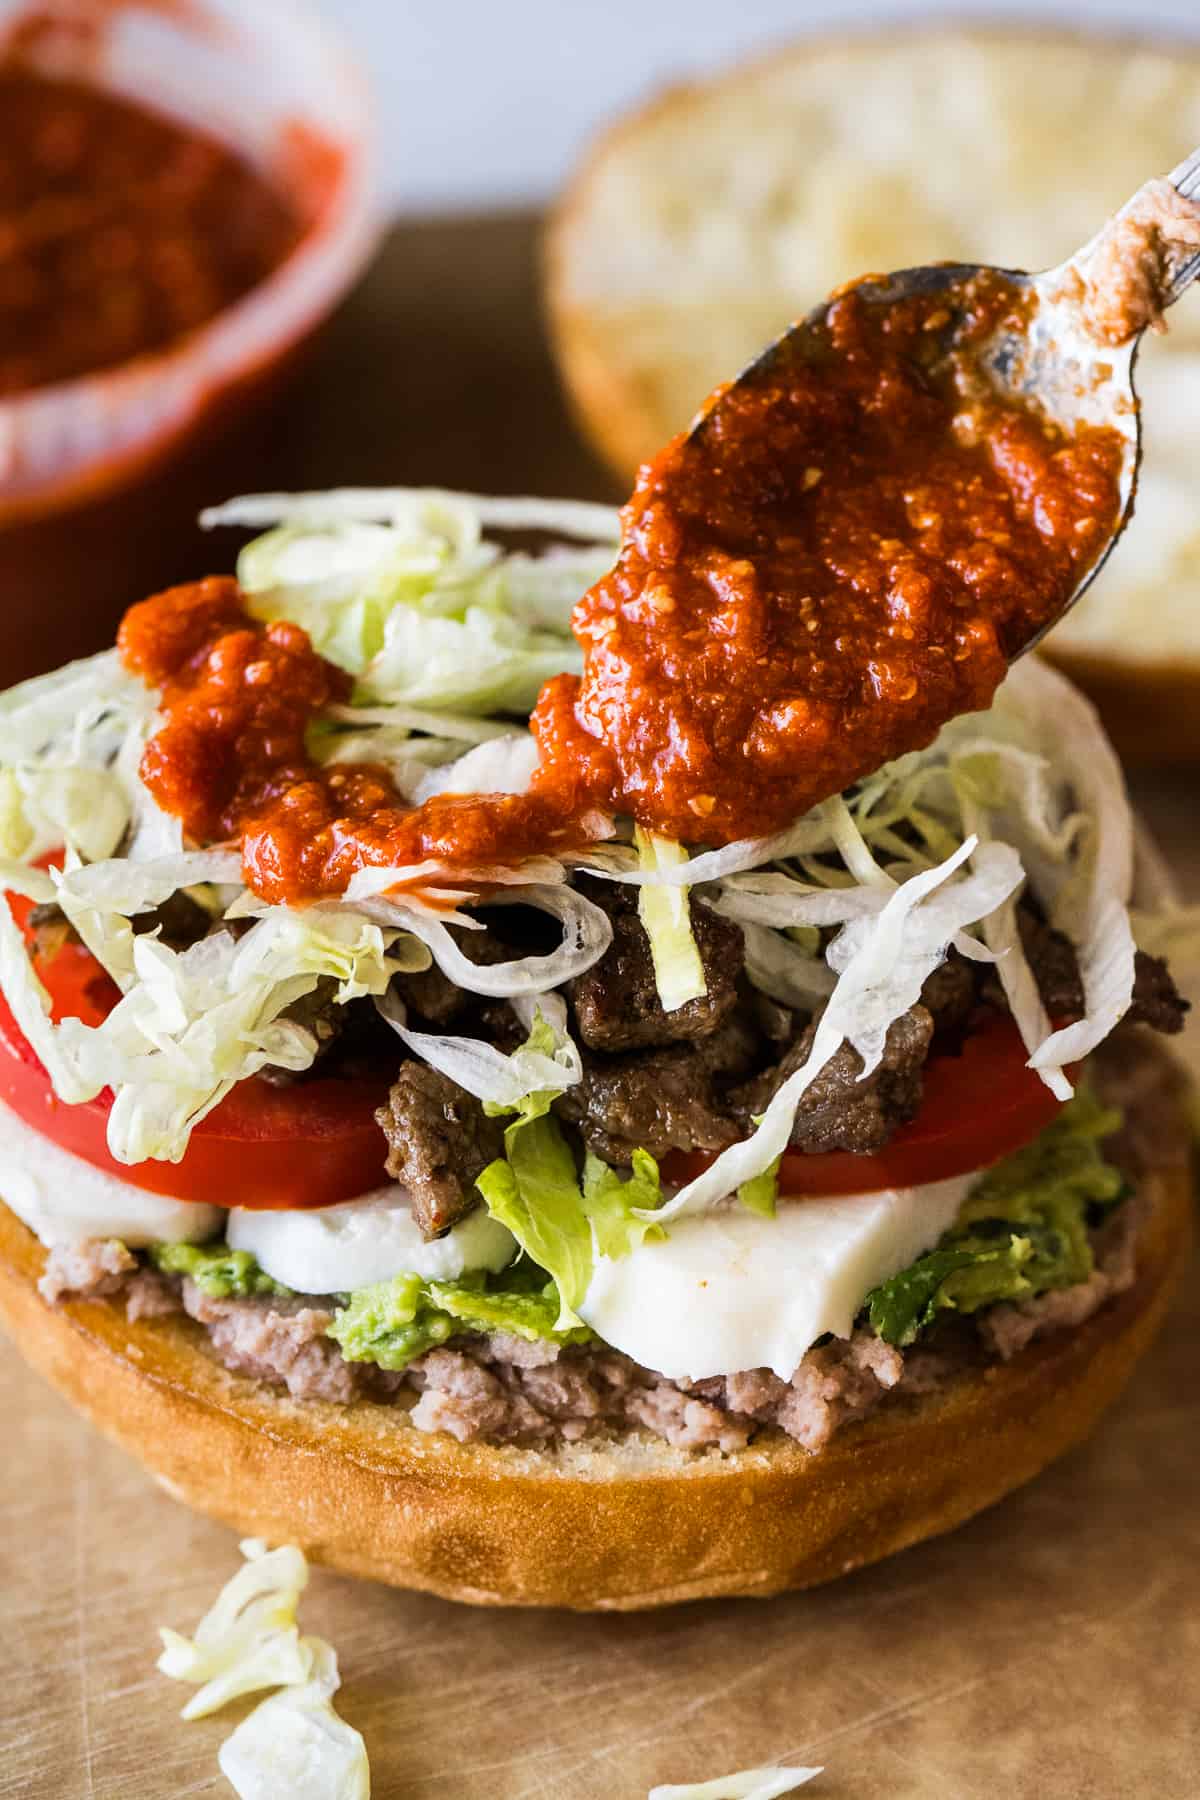 Red salsa being drizzled on a torta.